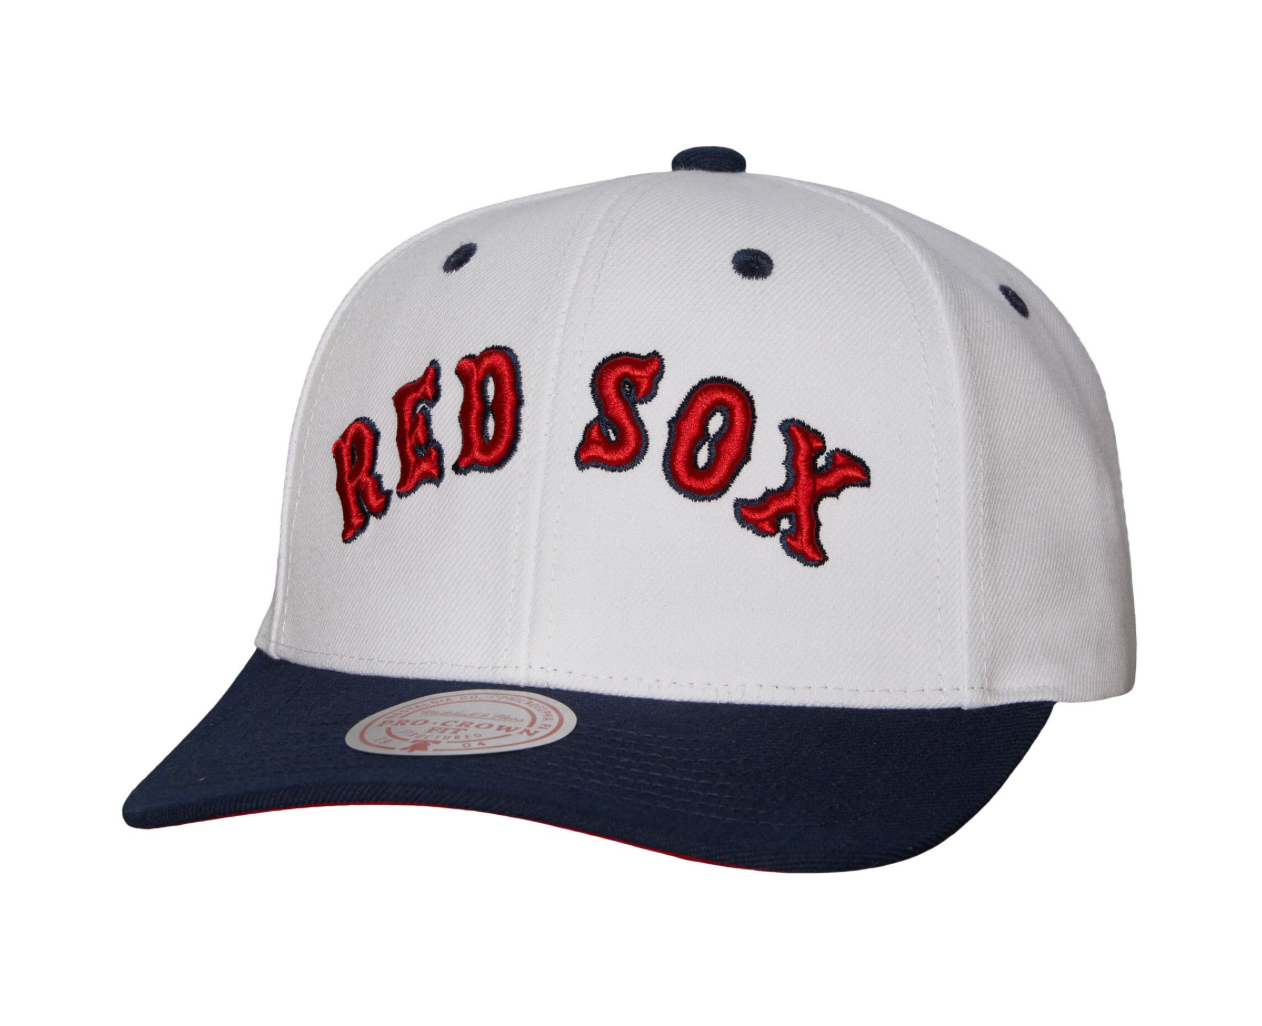 Boston Red Sox Mitchell & Ness Cooperstown Collection Pro Crown Snapback Hat - White